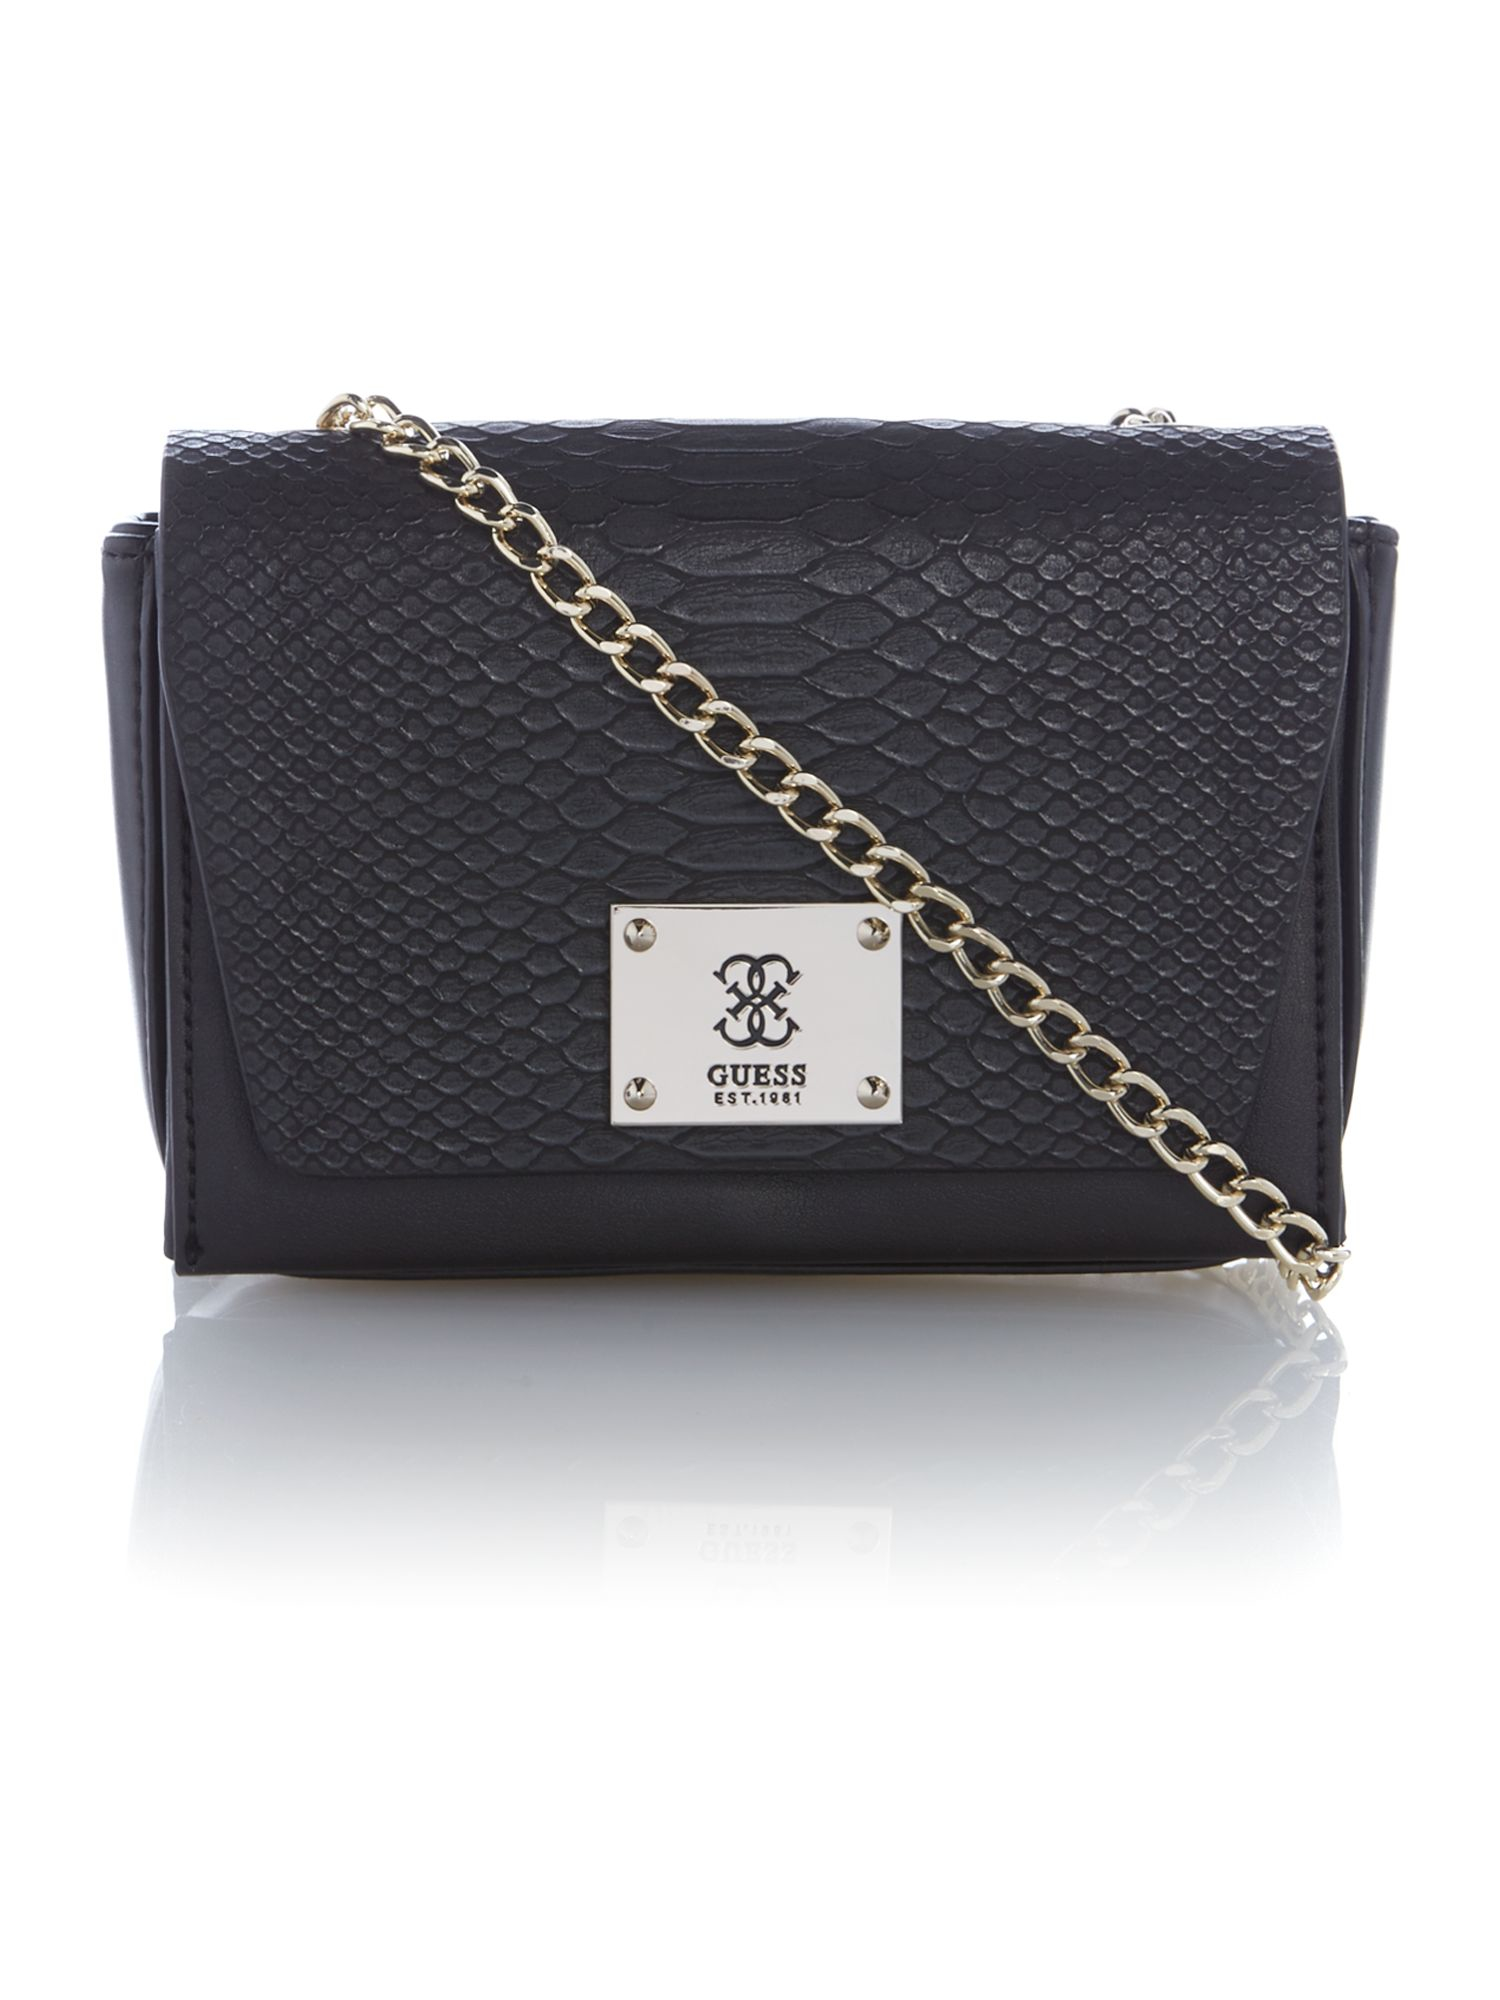 Guess Black Flapover Chain Crossbody Bag in Black | Lyst